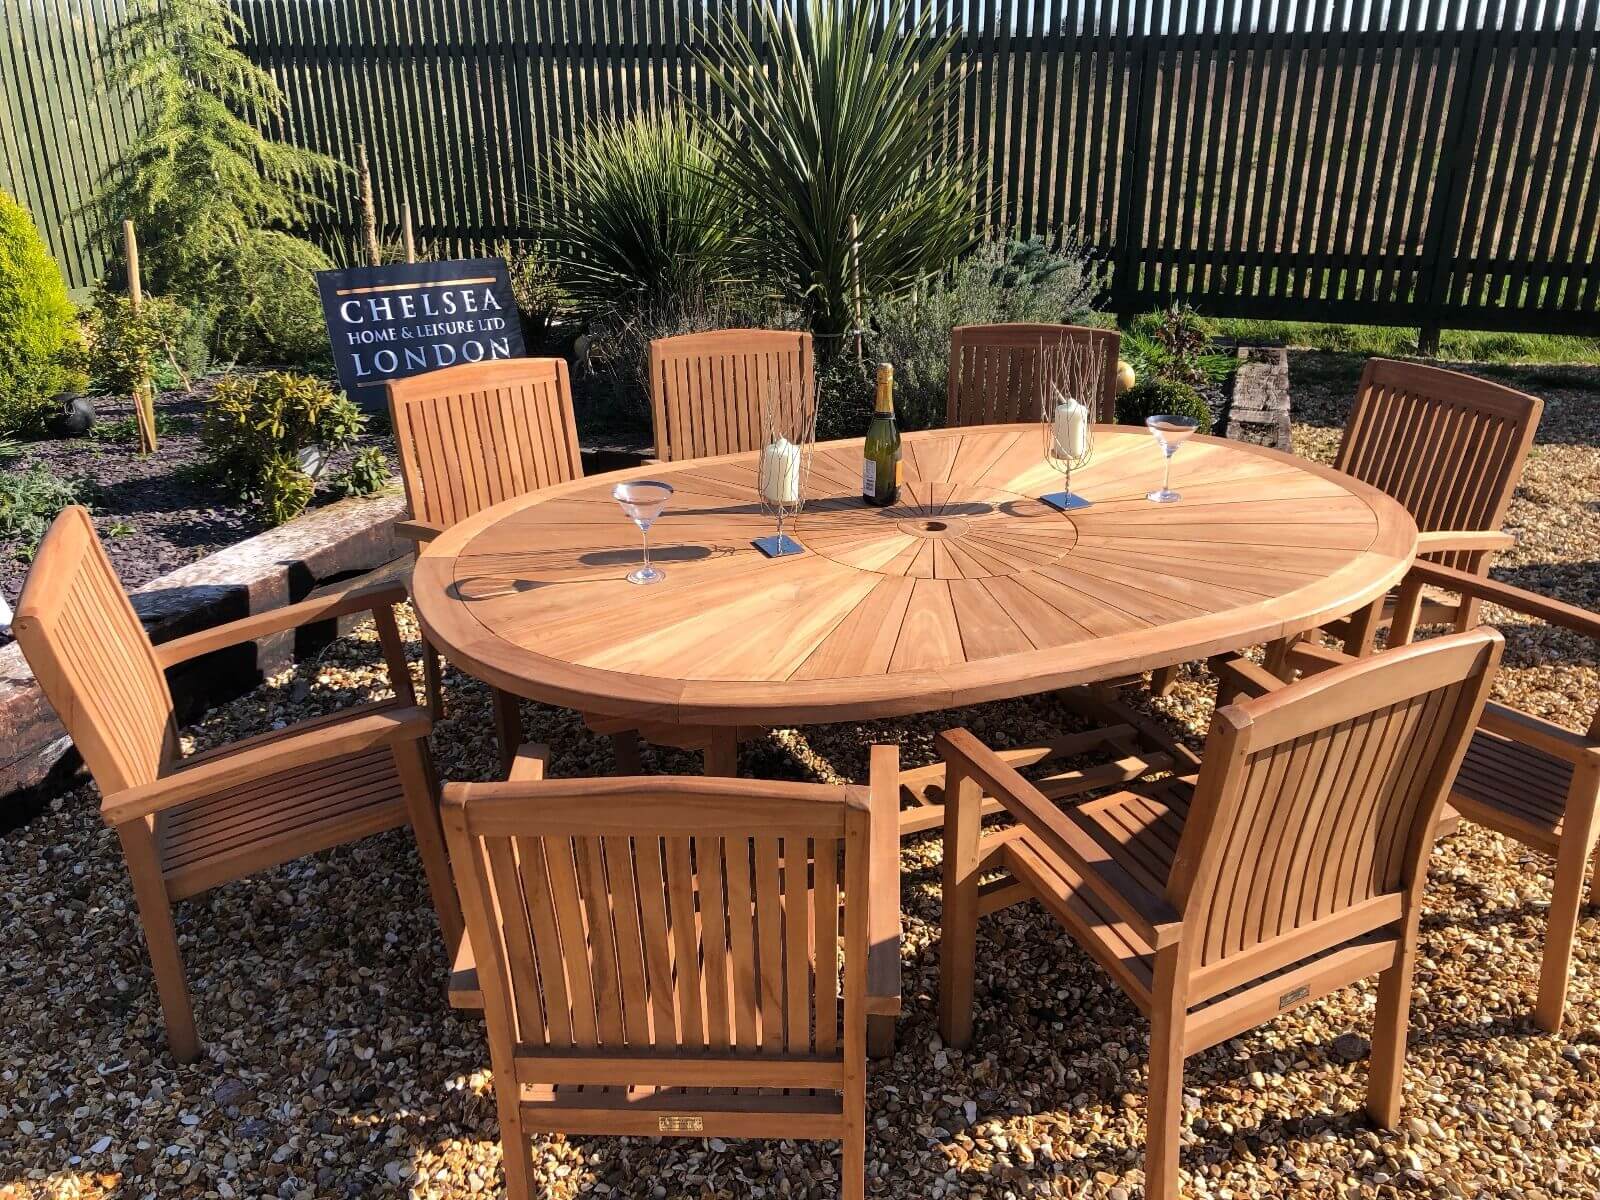 How To Choose Affordable Teak Furniture For Your Patio